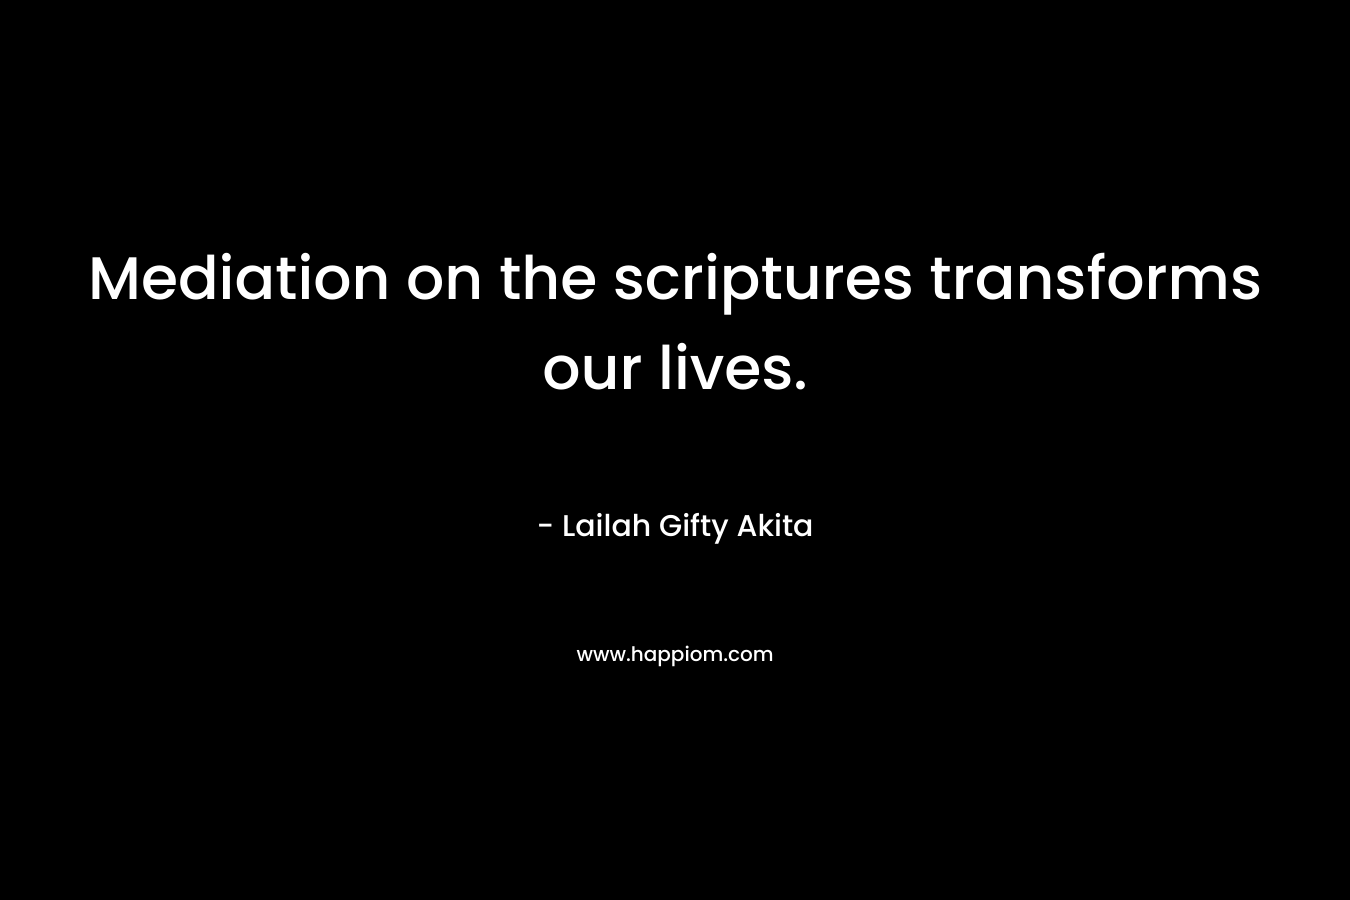 Mediation on the scriptures transforms our lives.